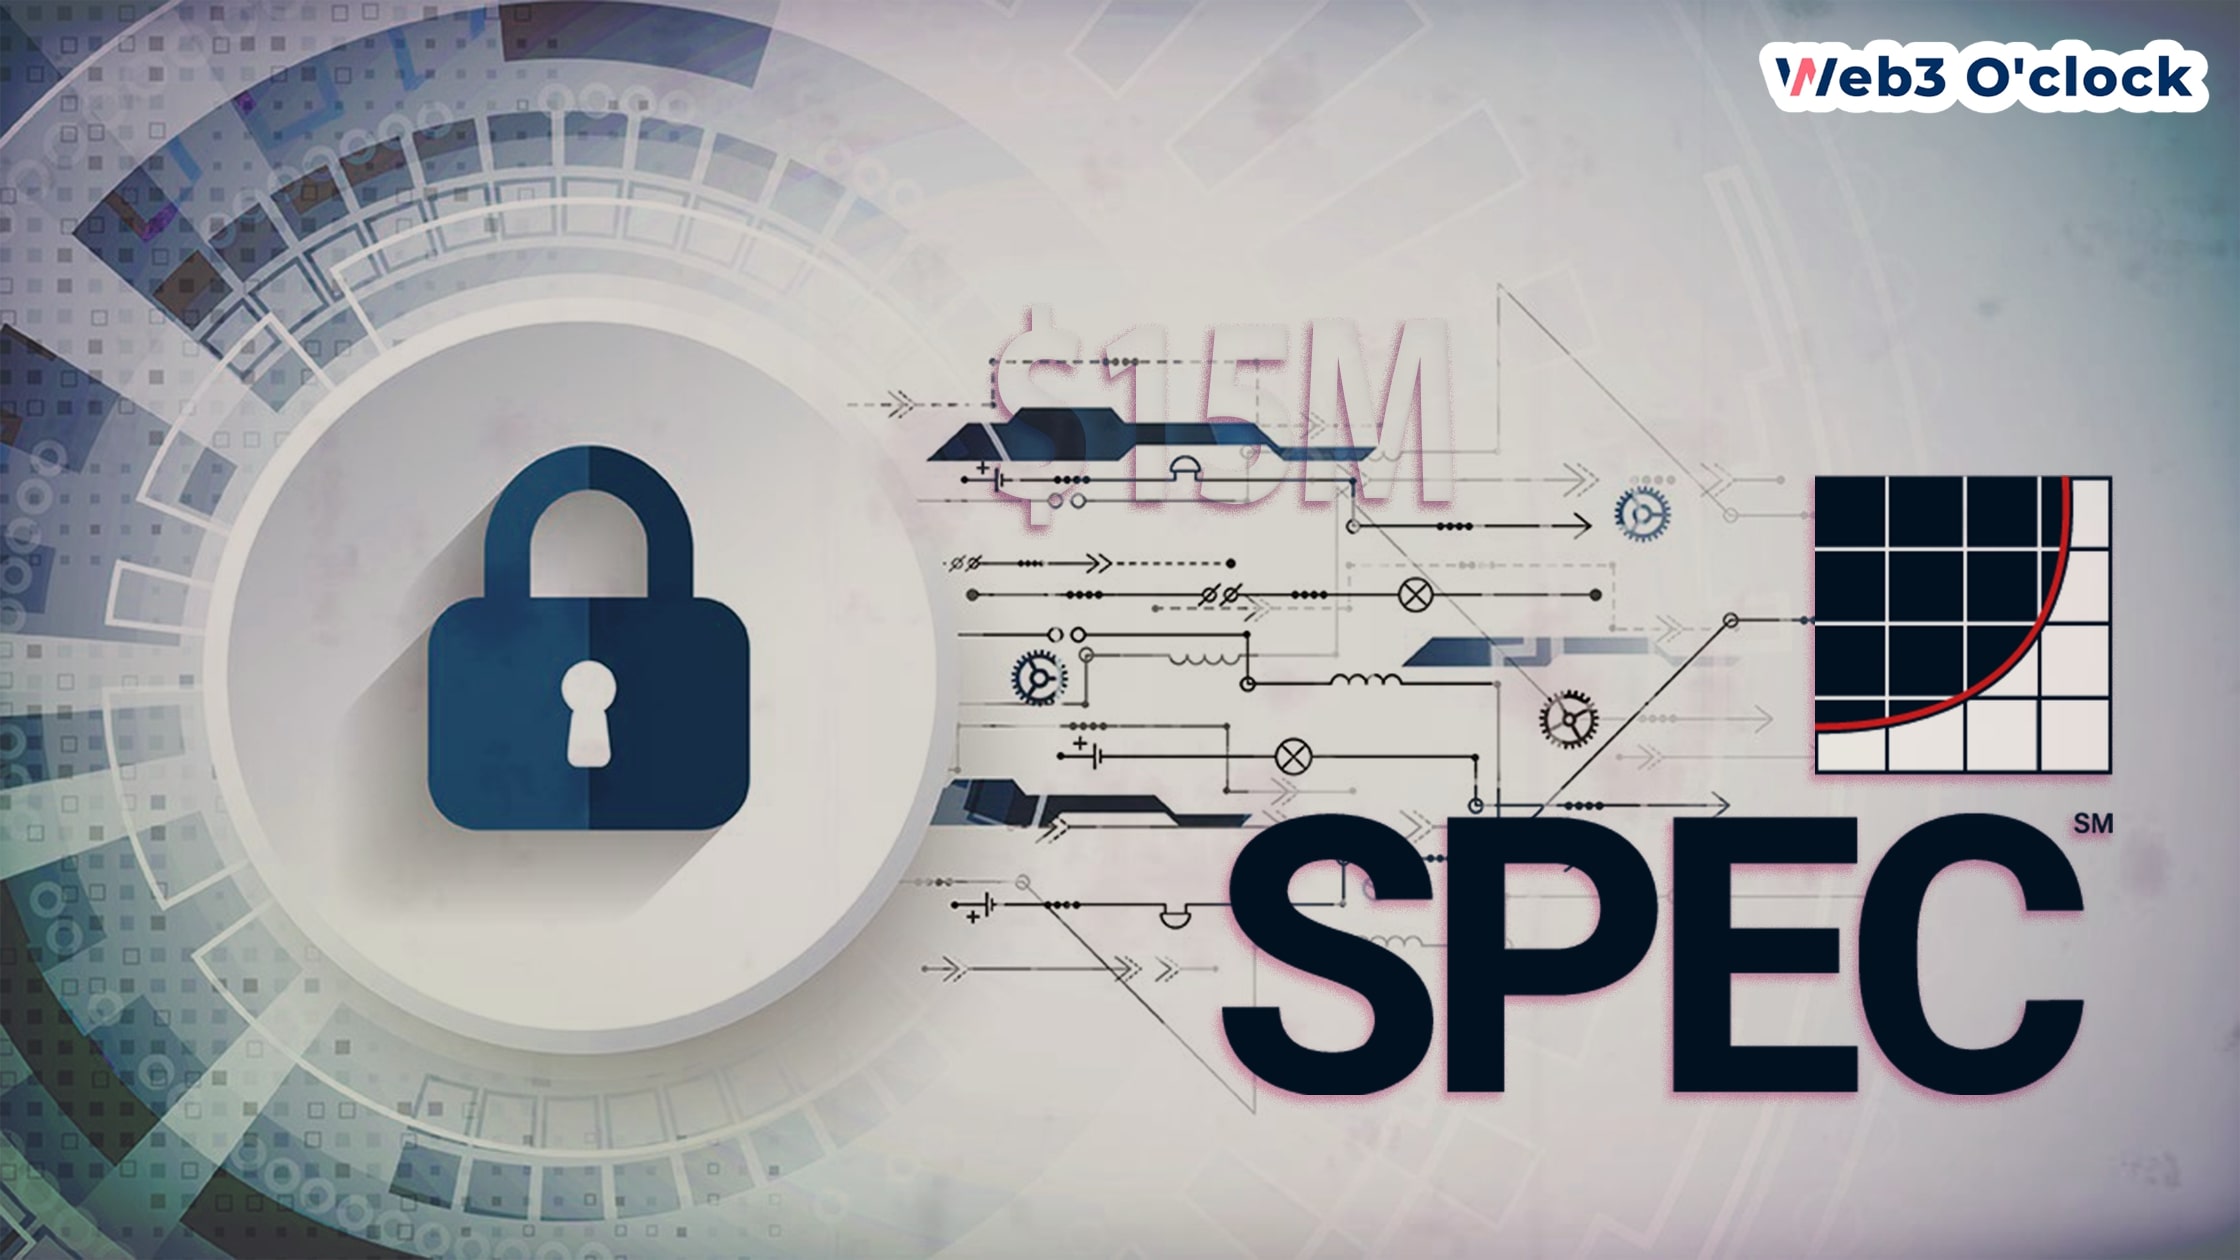 Spec Secures $15 Million Funding by Web3O'clock